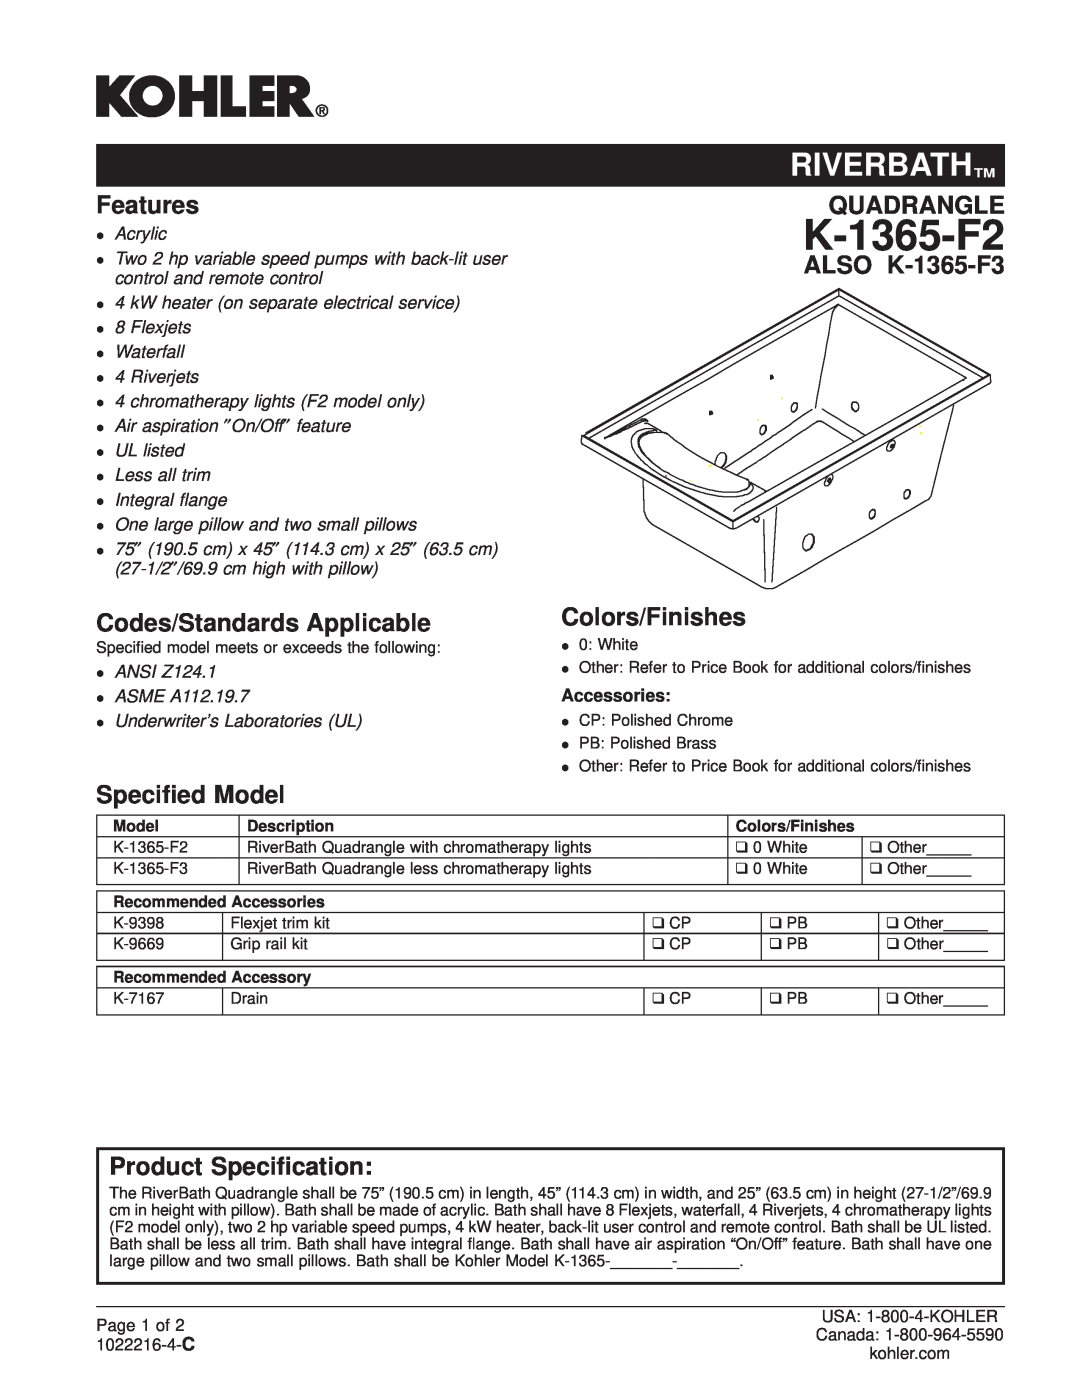 Kohler K-1365-F2 manual Riverbath, Features, Quadrangle, ALSO K-1365-F3, Codes/Standards Applicable, Colors/Finishes 